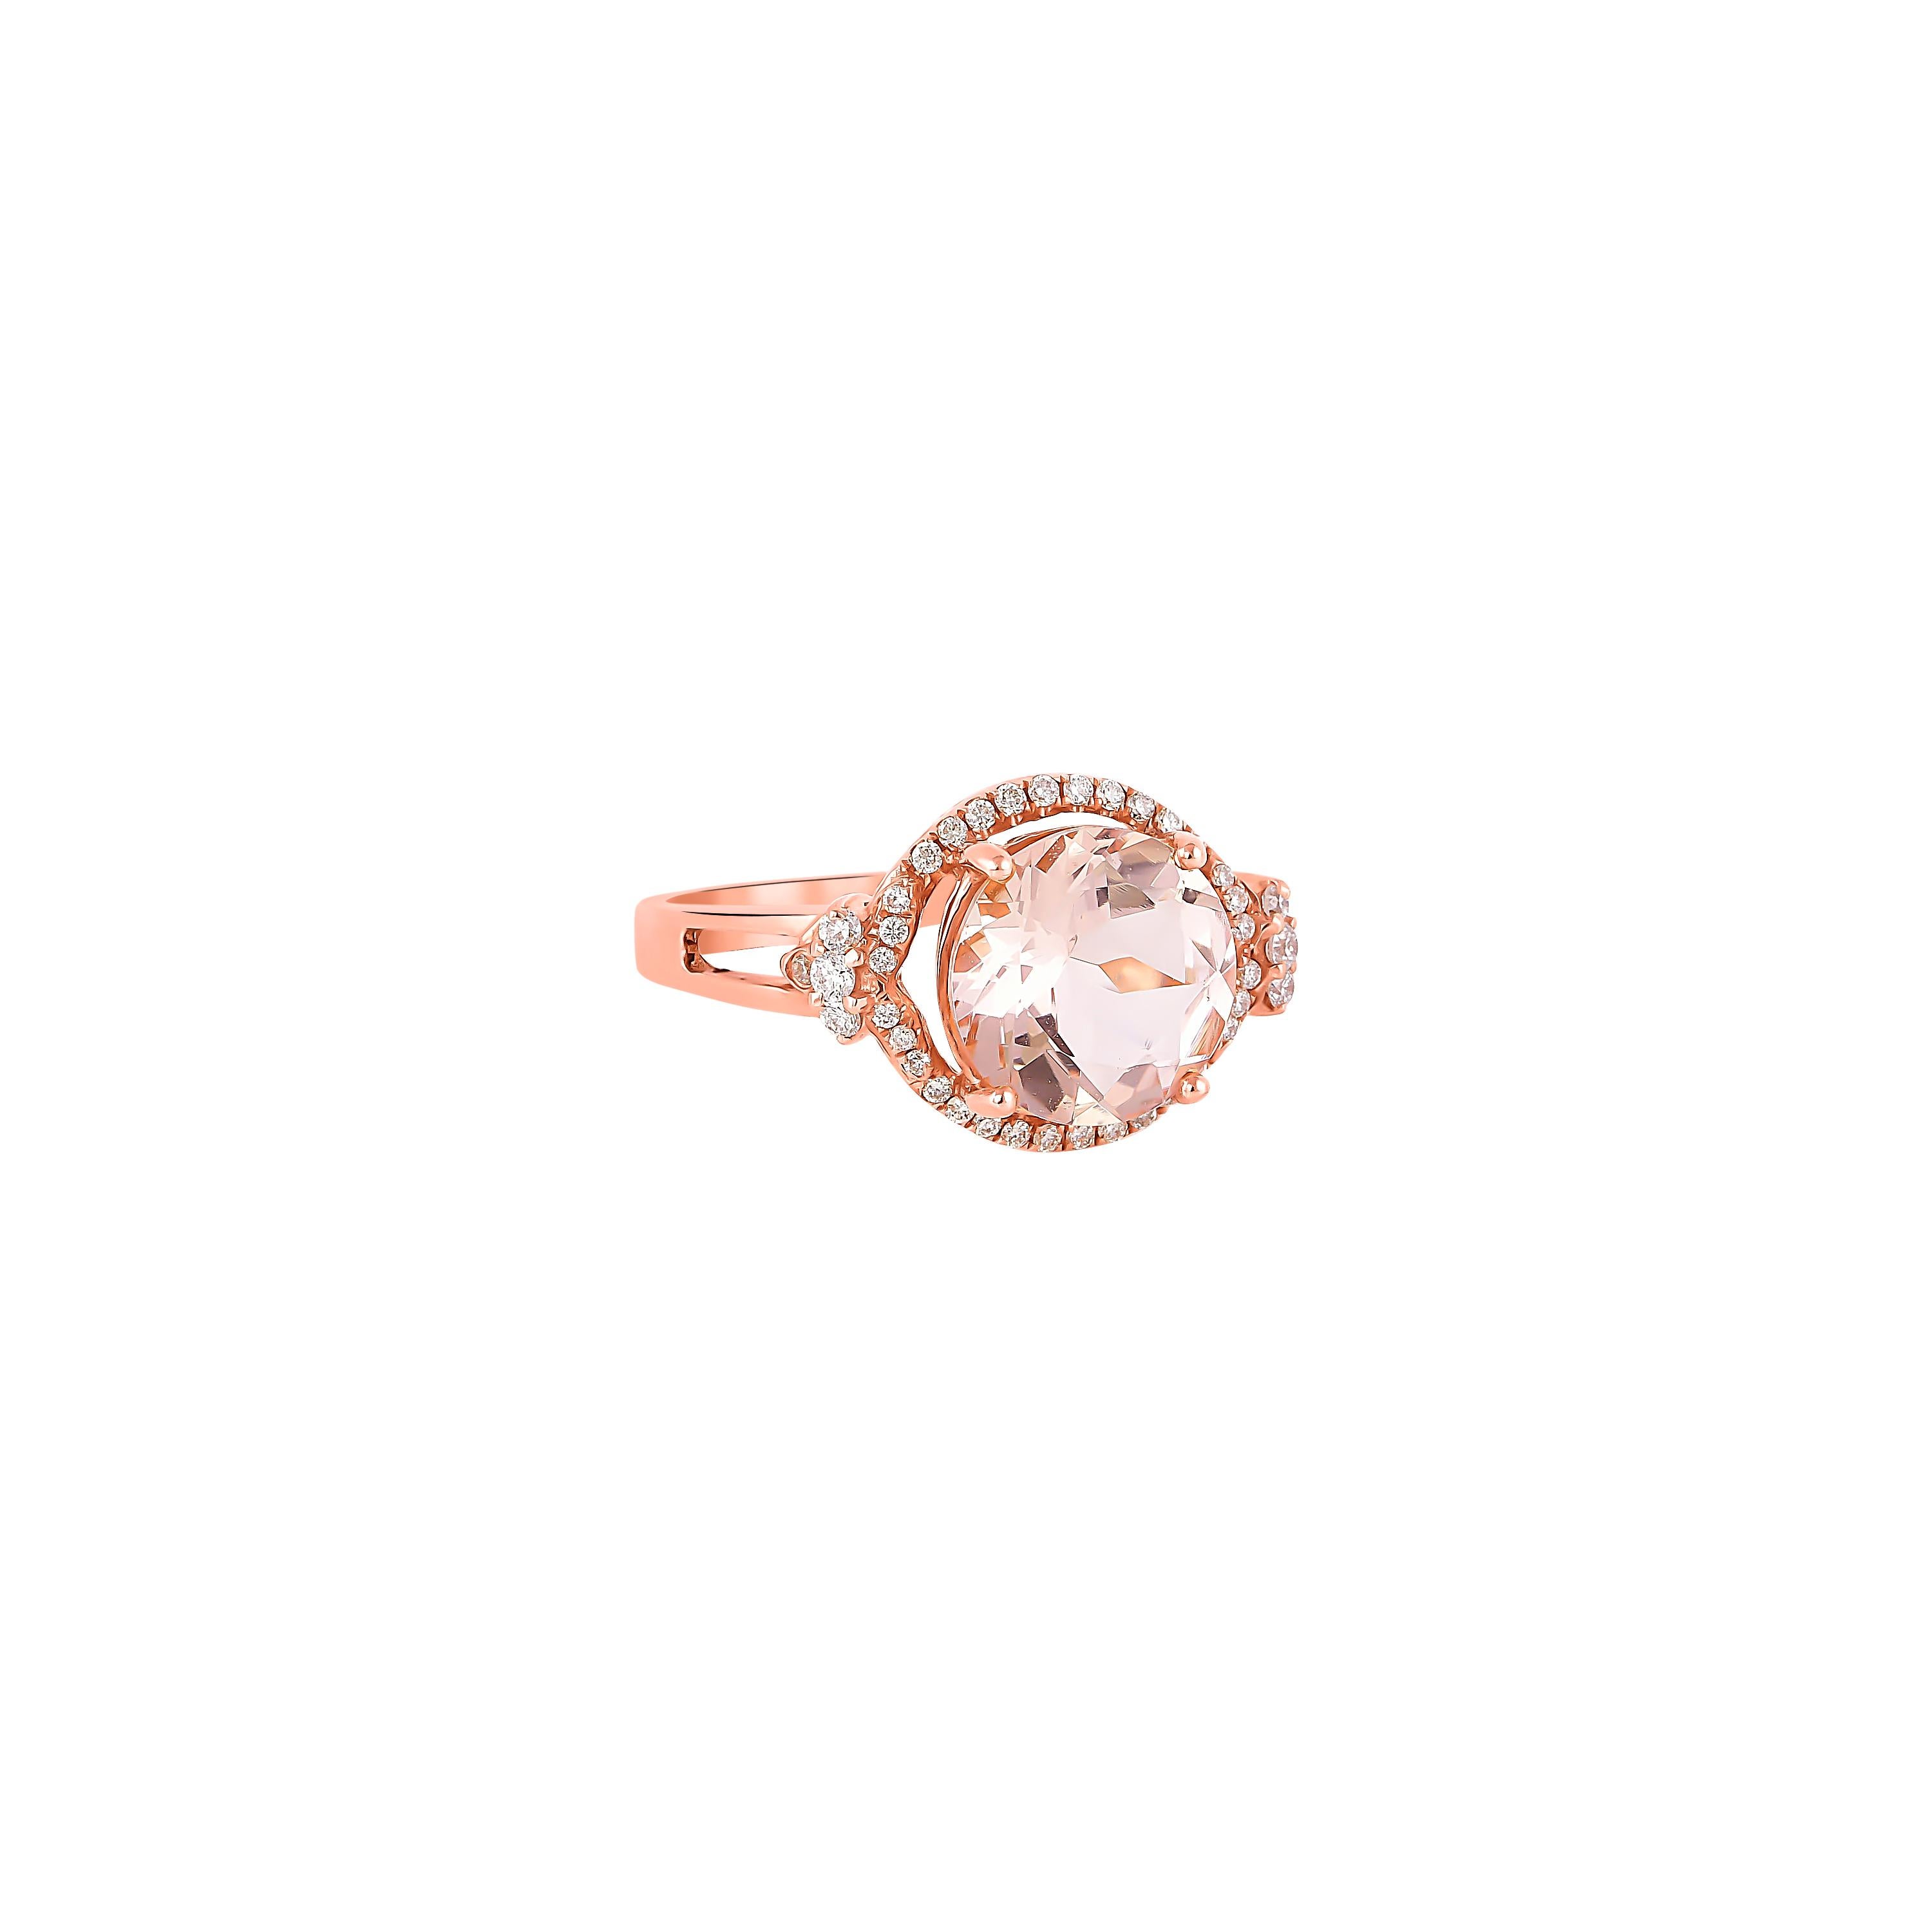 This collection features an array of magnificent morganites! Accented with diamonds these rings are made in rose gold and present a classic yet elegant look. 

Classic morganite ring in 18K rose gold with diamonds. 

Morganite: 2.11 carat round